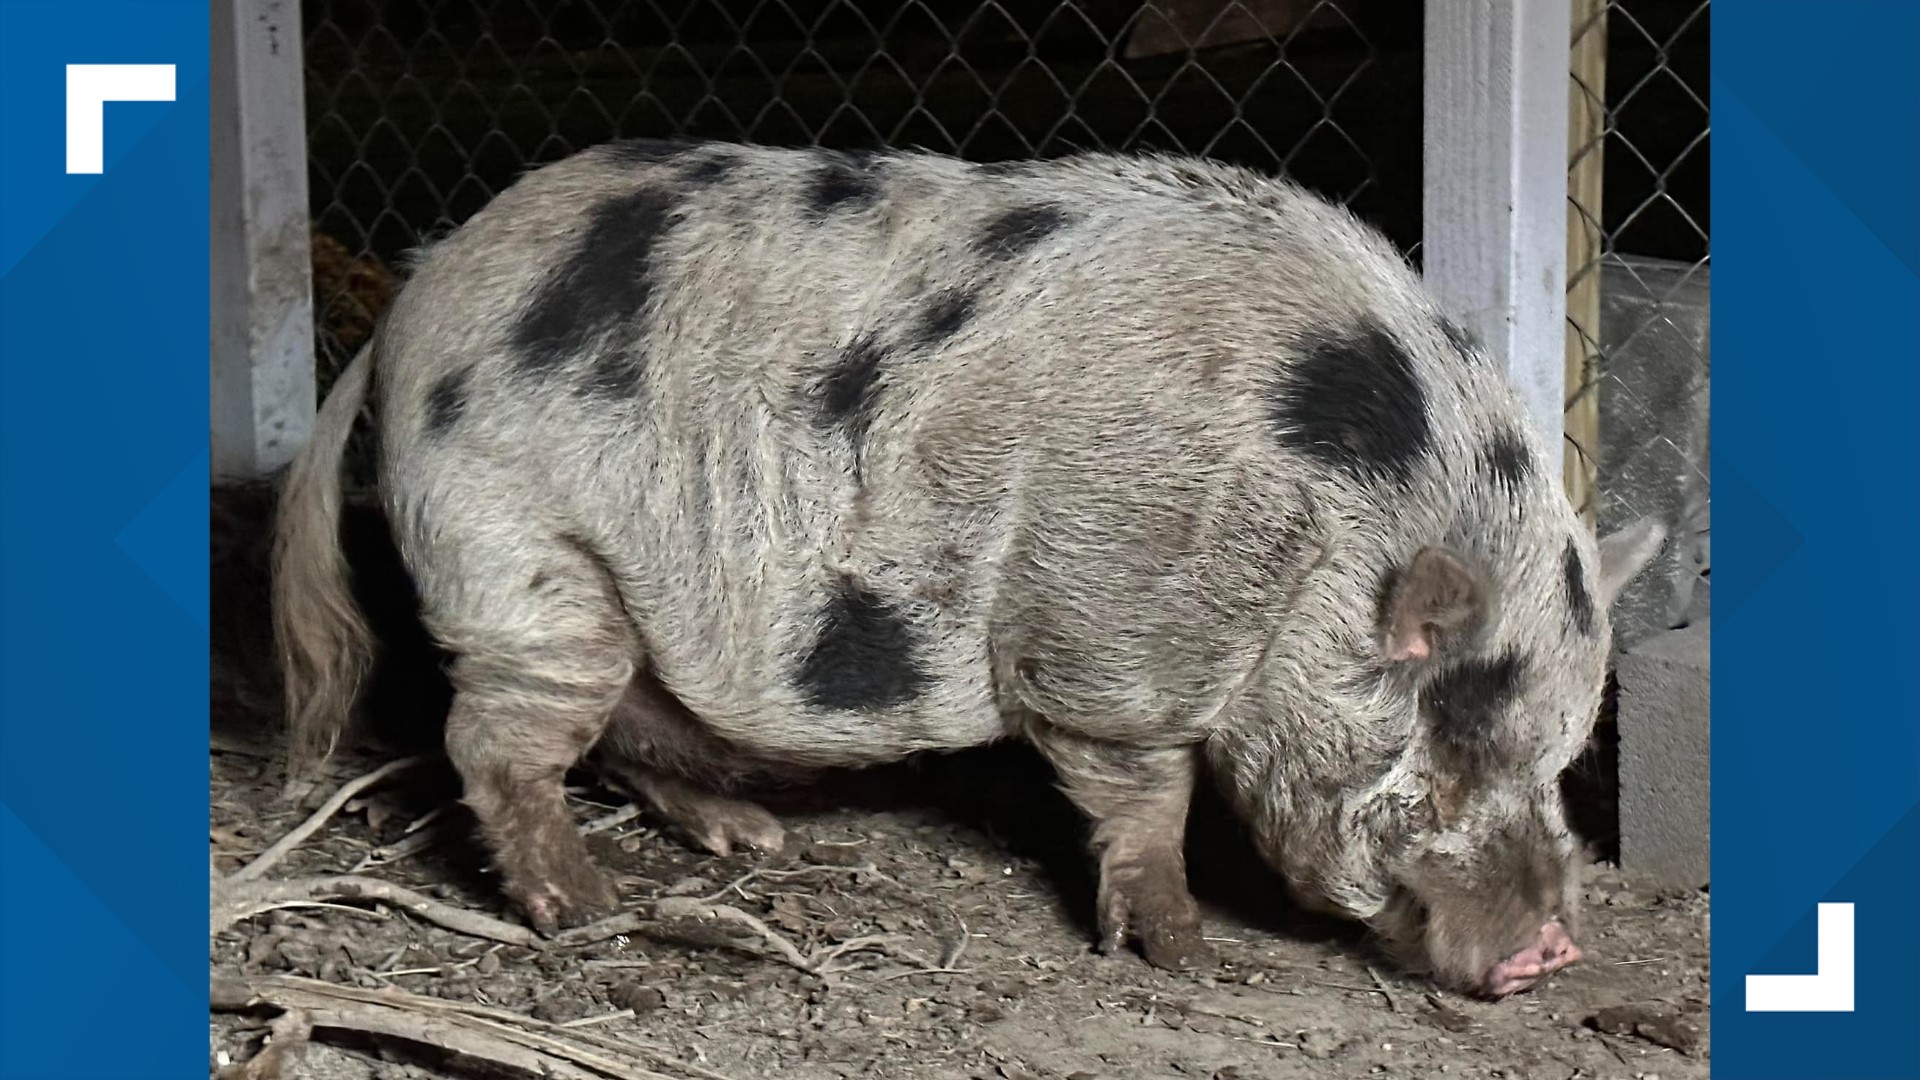 A pesky pet pig is running hog wild in Adams County. At almost 200 pounds, Kevin Bacon the pig has been hard to catch.